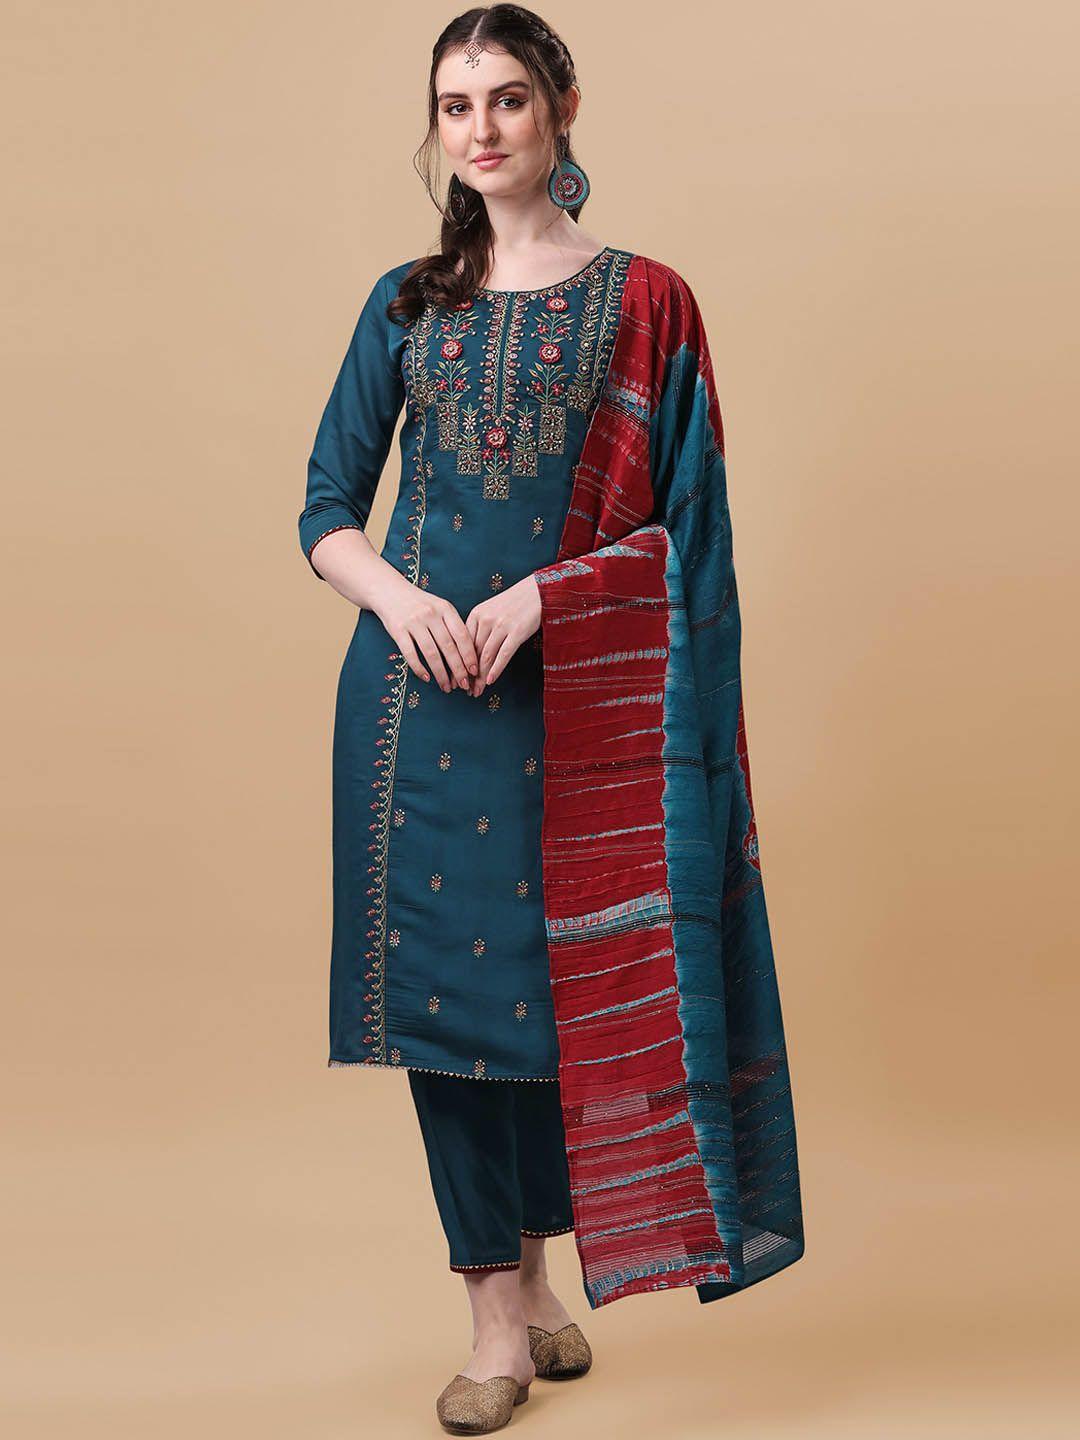 berrylicious-women-teal-floral-embroidered-thread-work-chanderi-cotton-kurta-with-trousers-&-with-dupatta